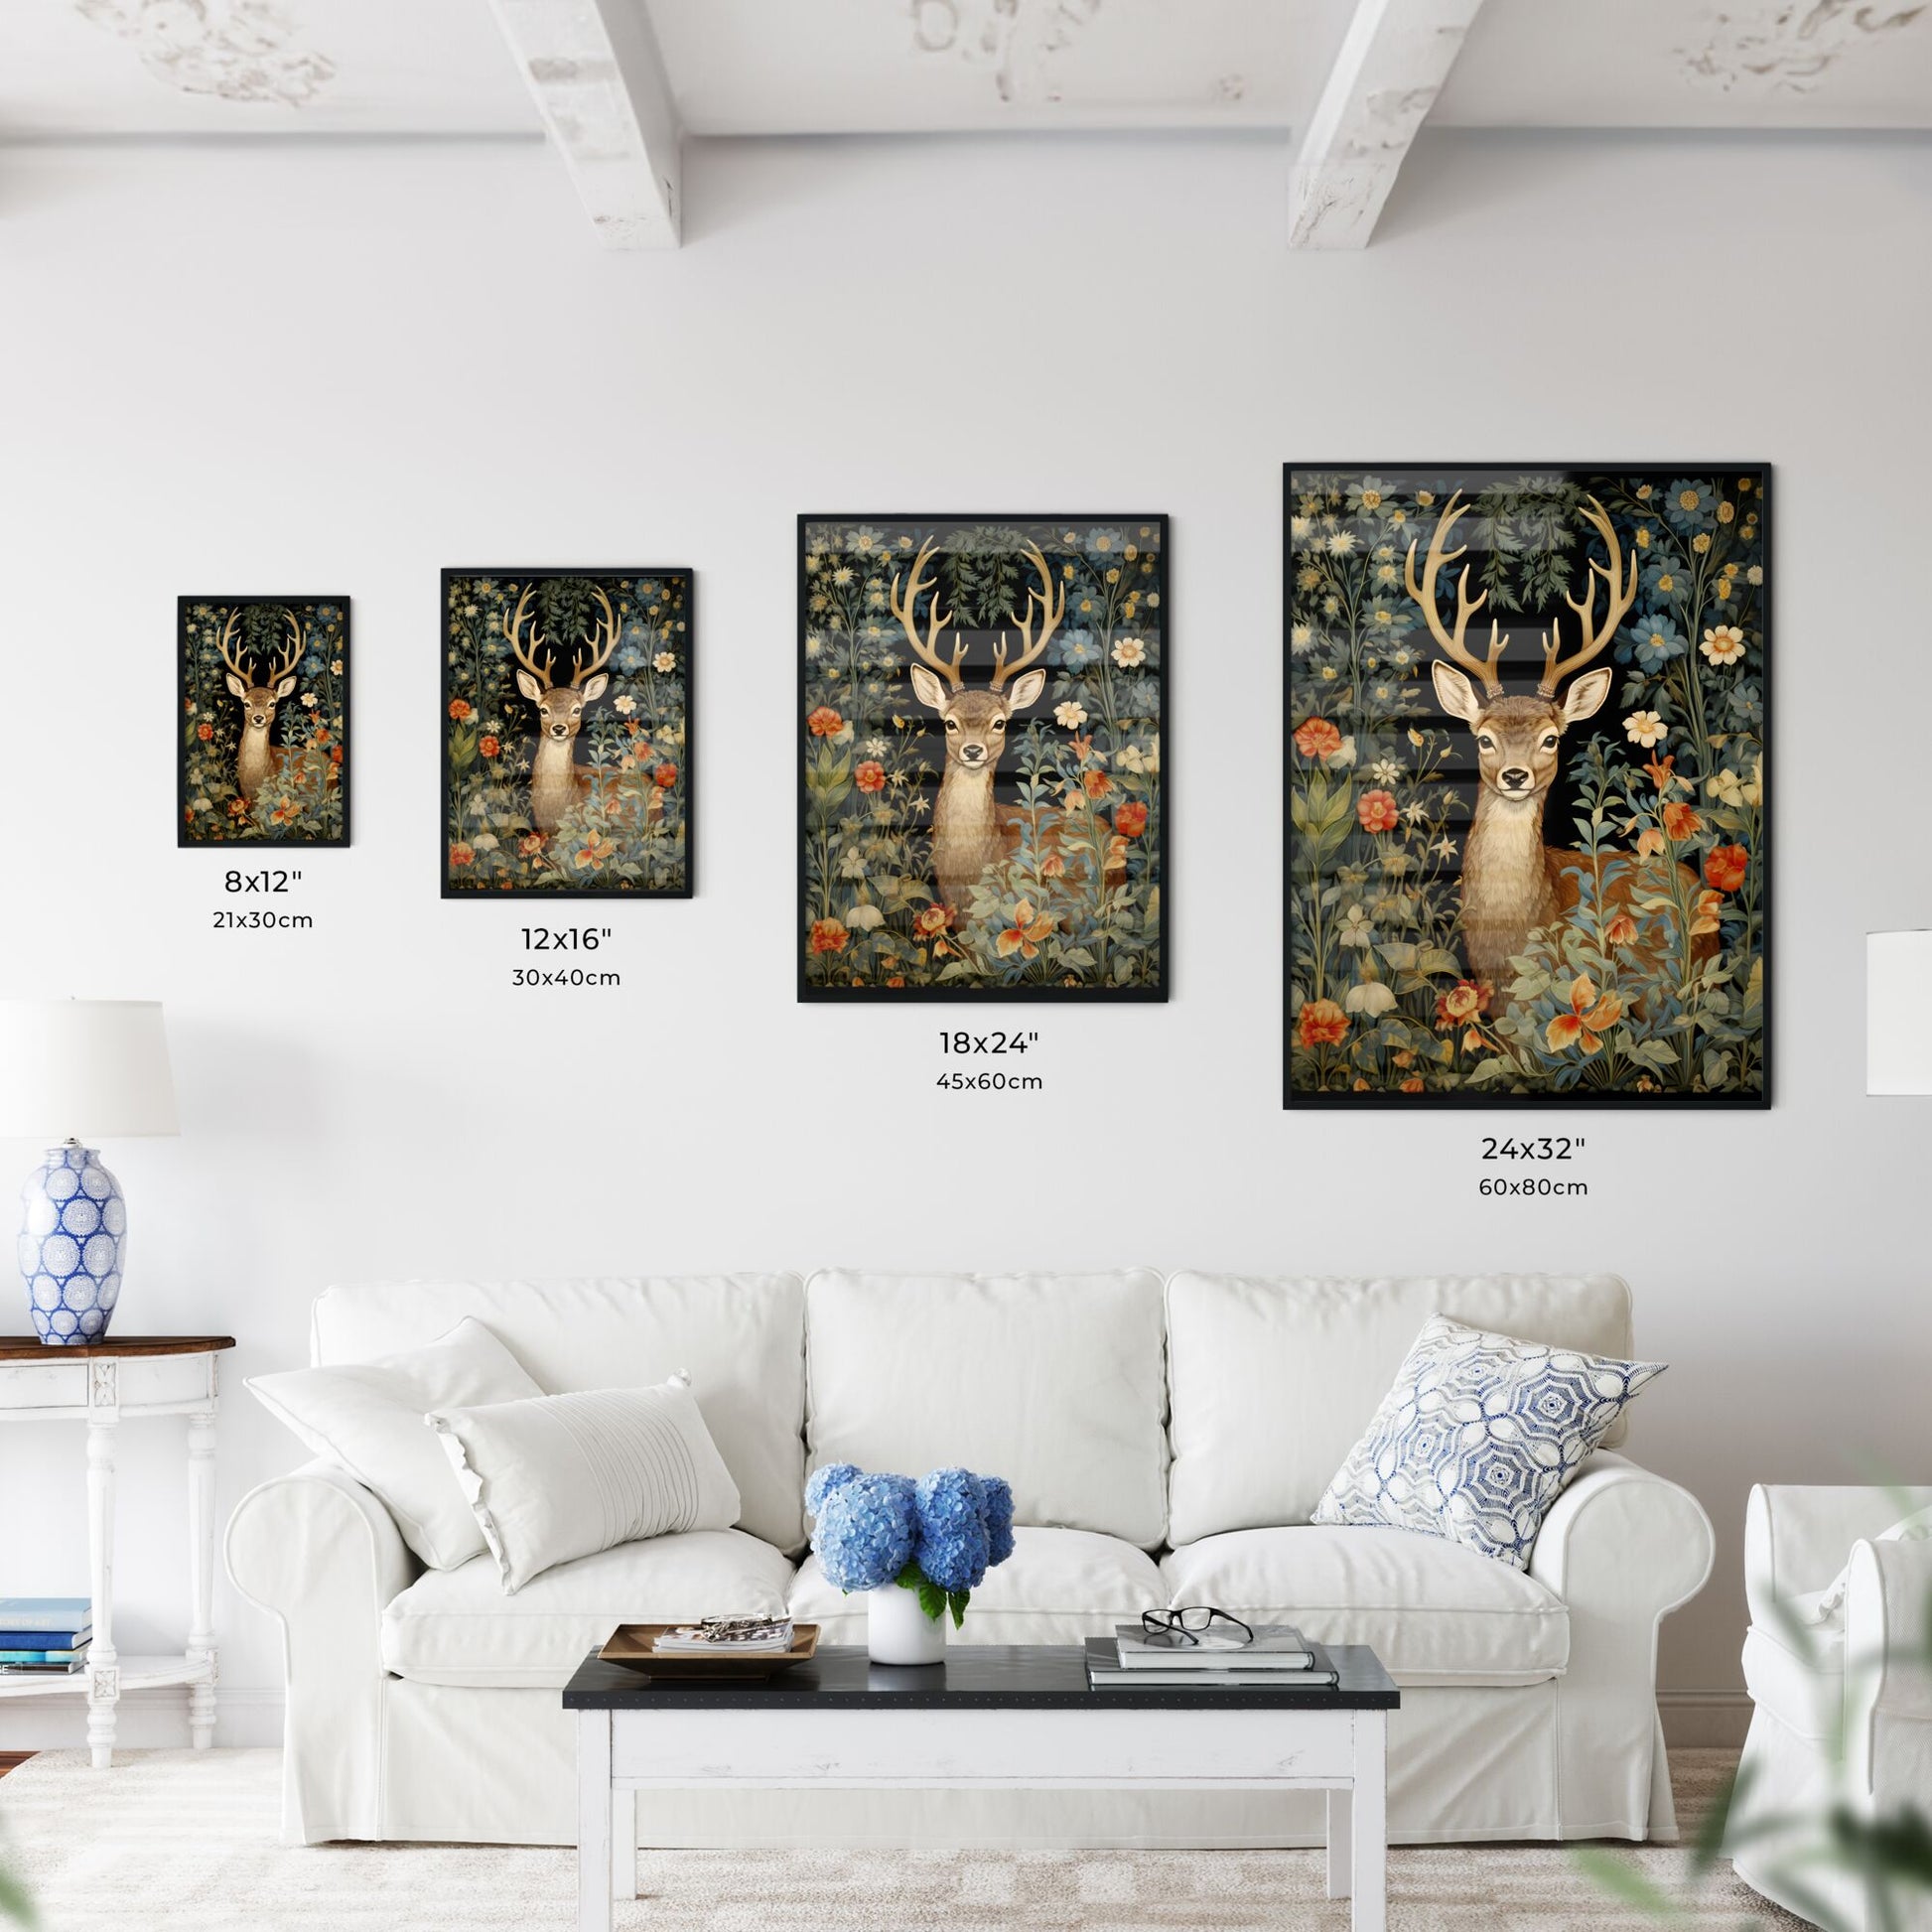 A Poster of a deer in the middle of floral tapestry - A Deer In A Garden Default Title